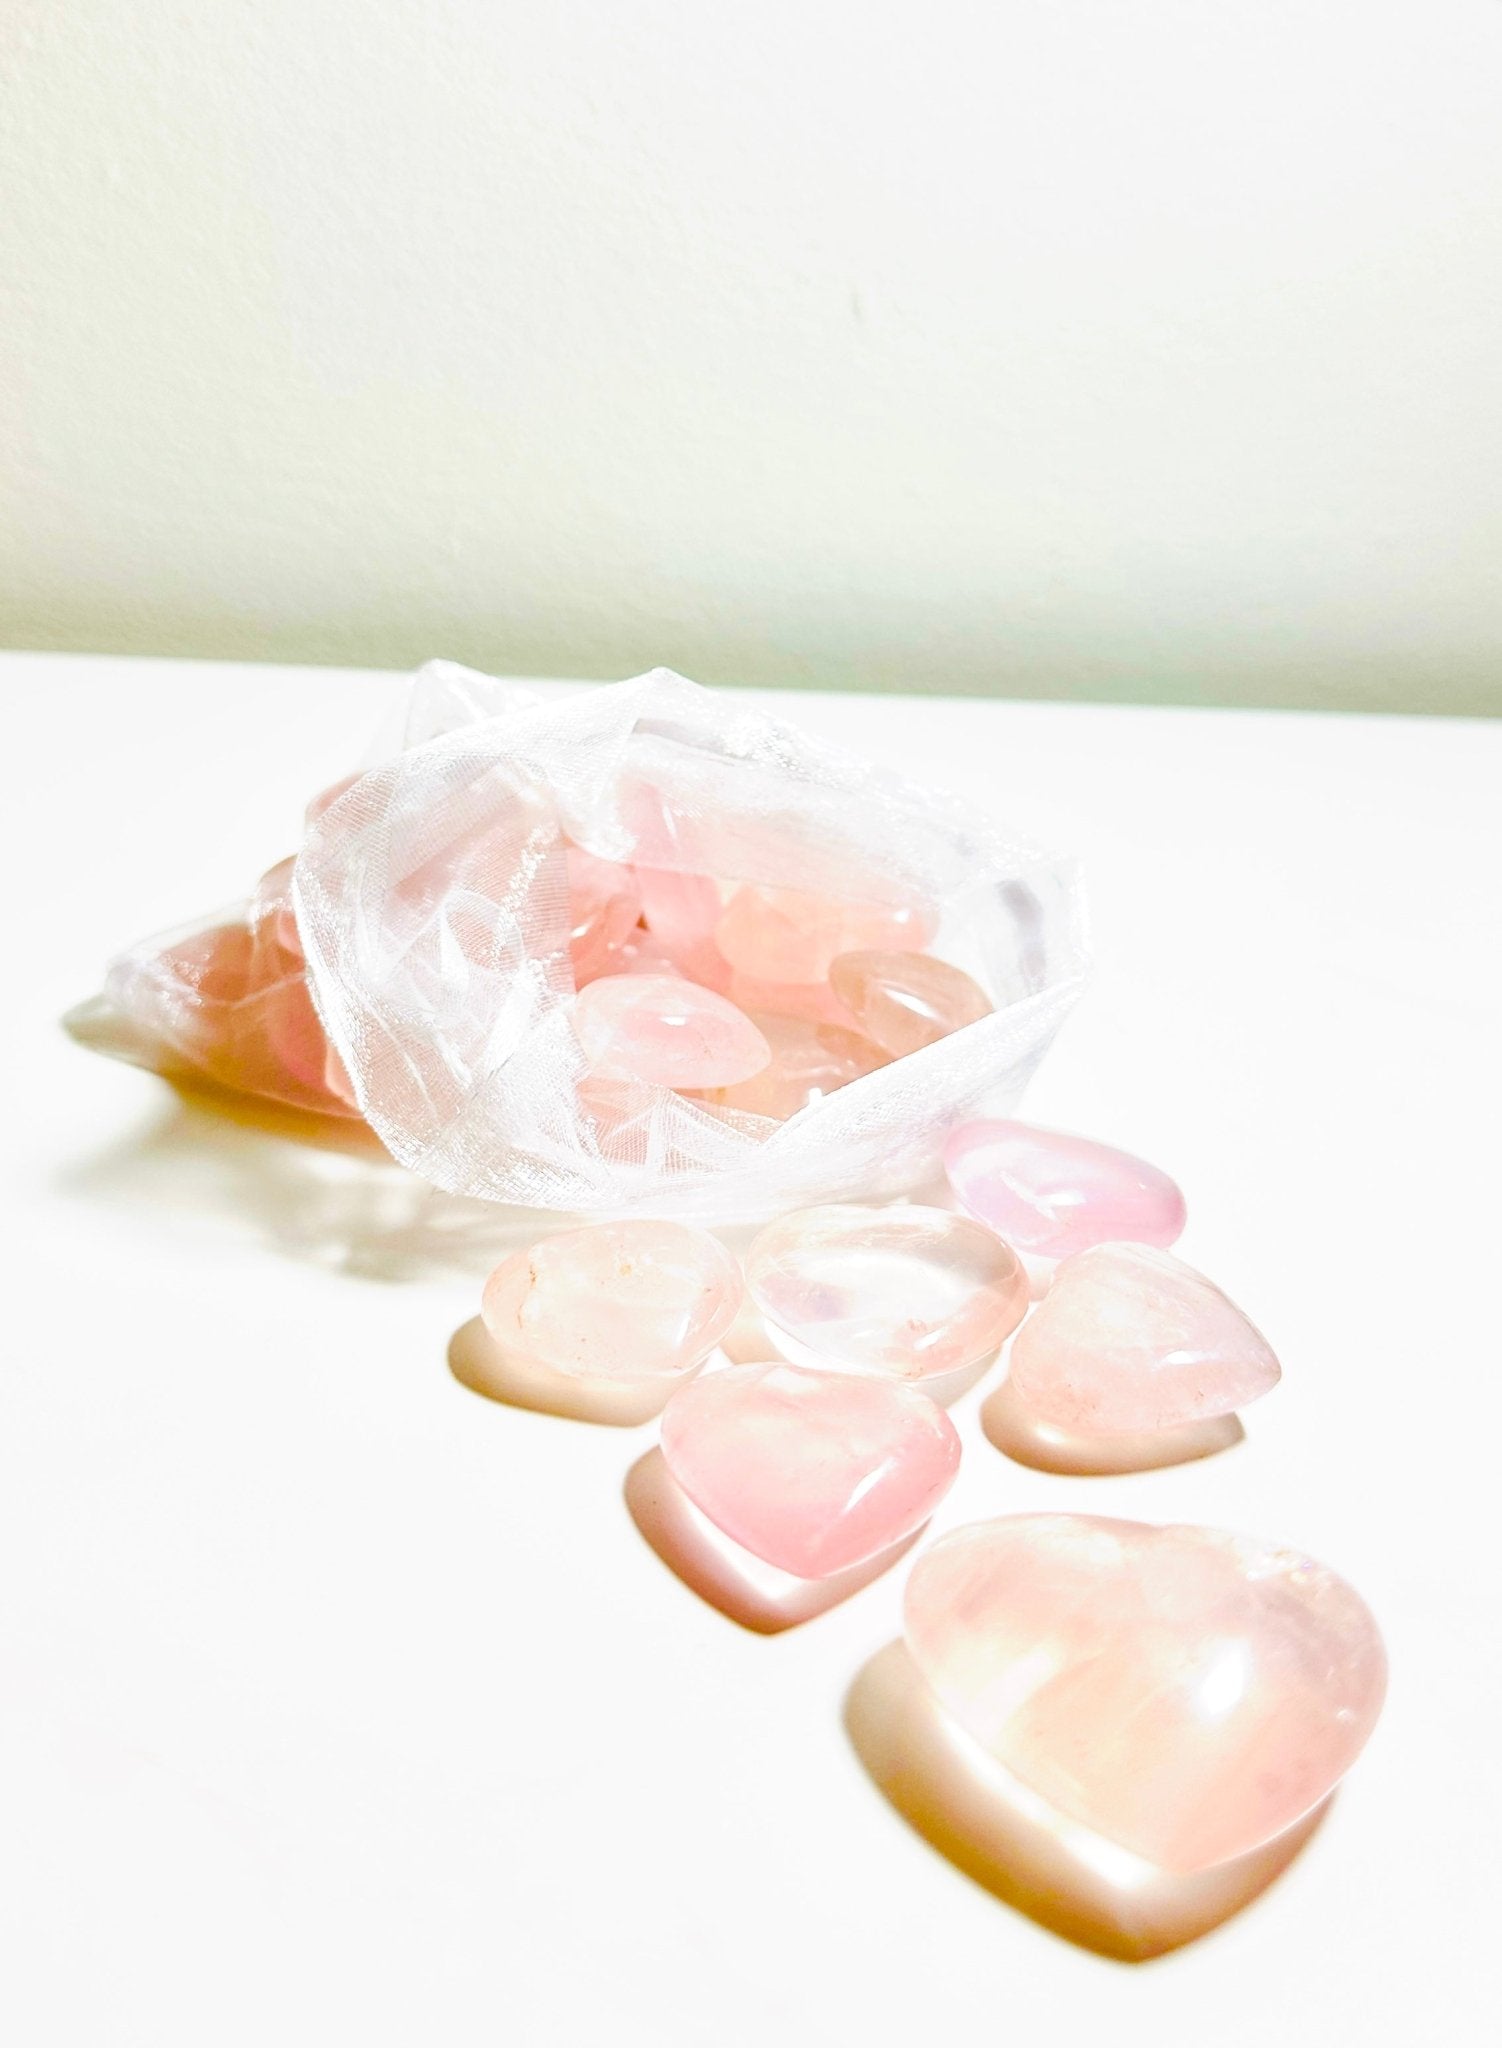 Buy by the Pound - Curated Gemstone Collections - KREATEUR MIAMI